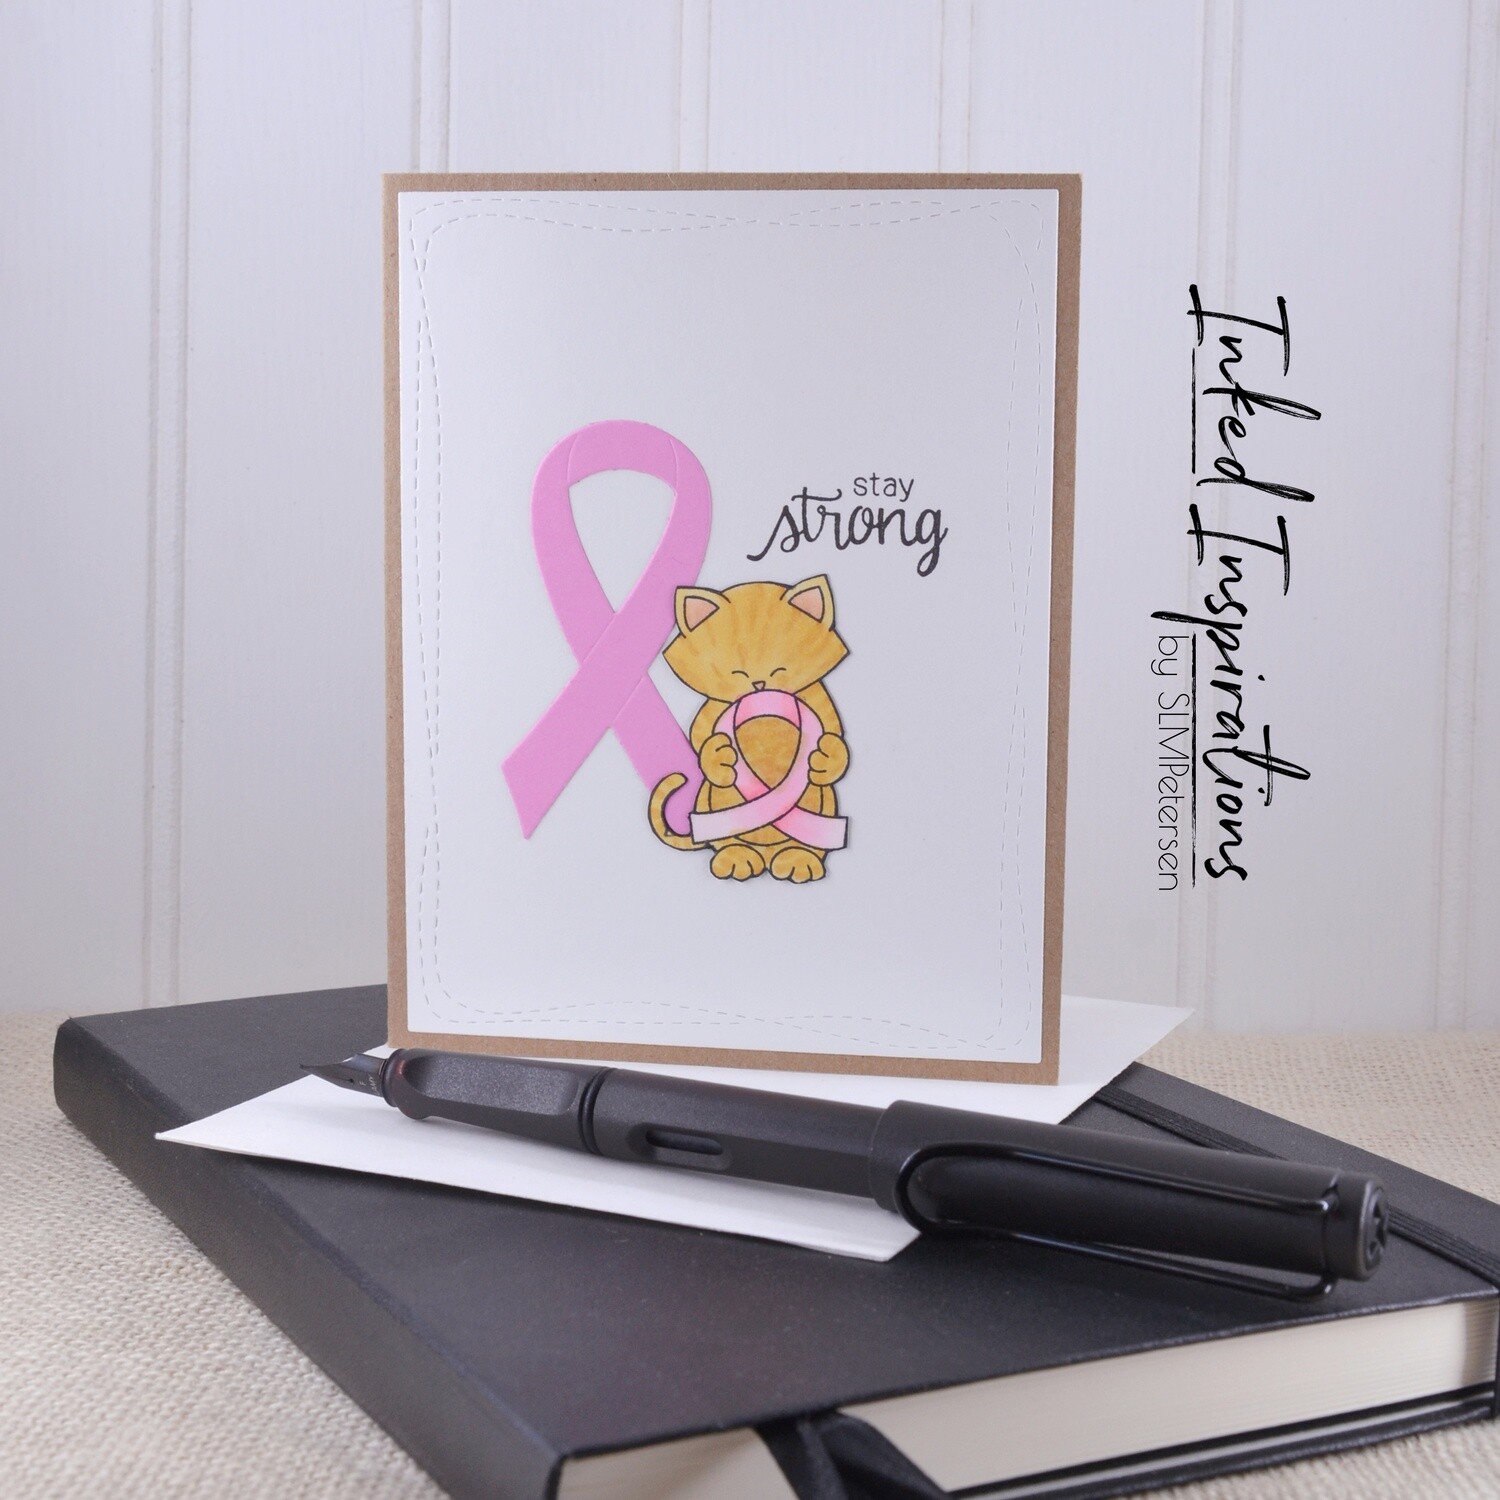 Stay Strong - Pink Ribbon & Yellow Kitty